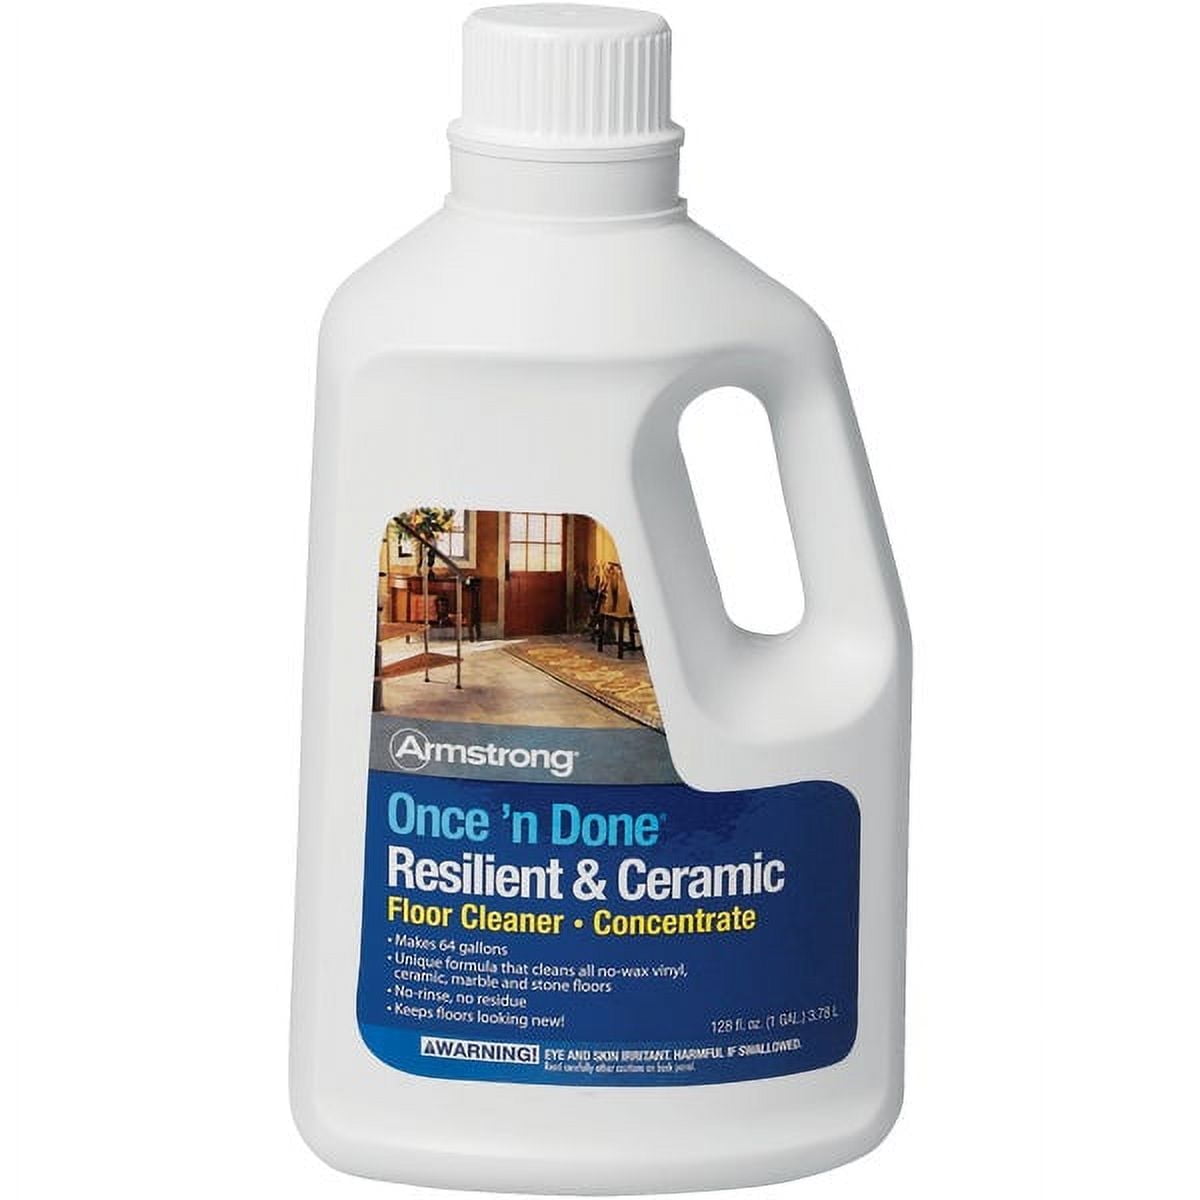 Armstrong Once 'N Done 1 gal. Resilient & Ceramic Floor Cleaner Concentrate Clean Fresh - image 1 of 3